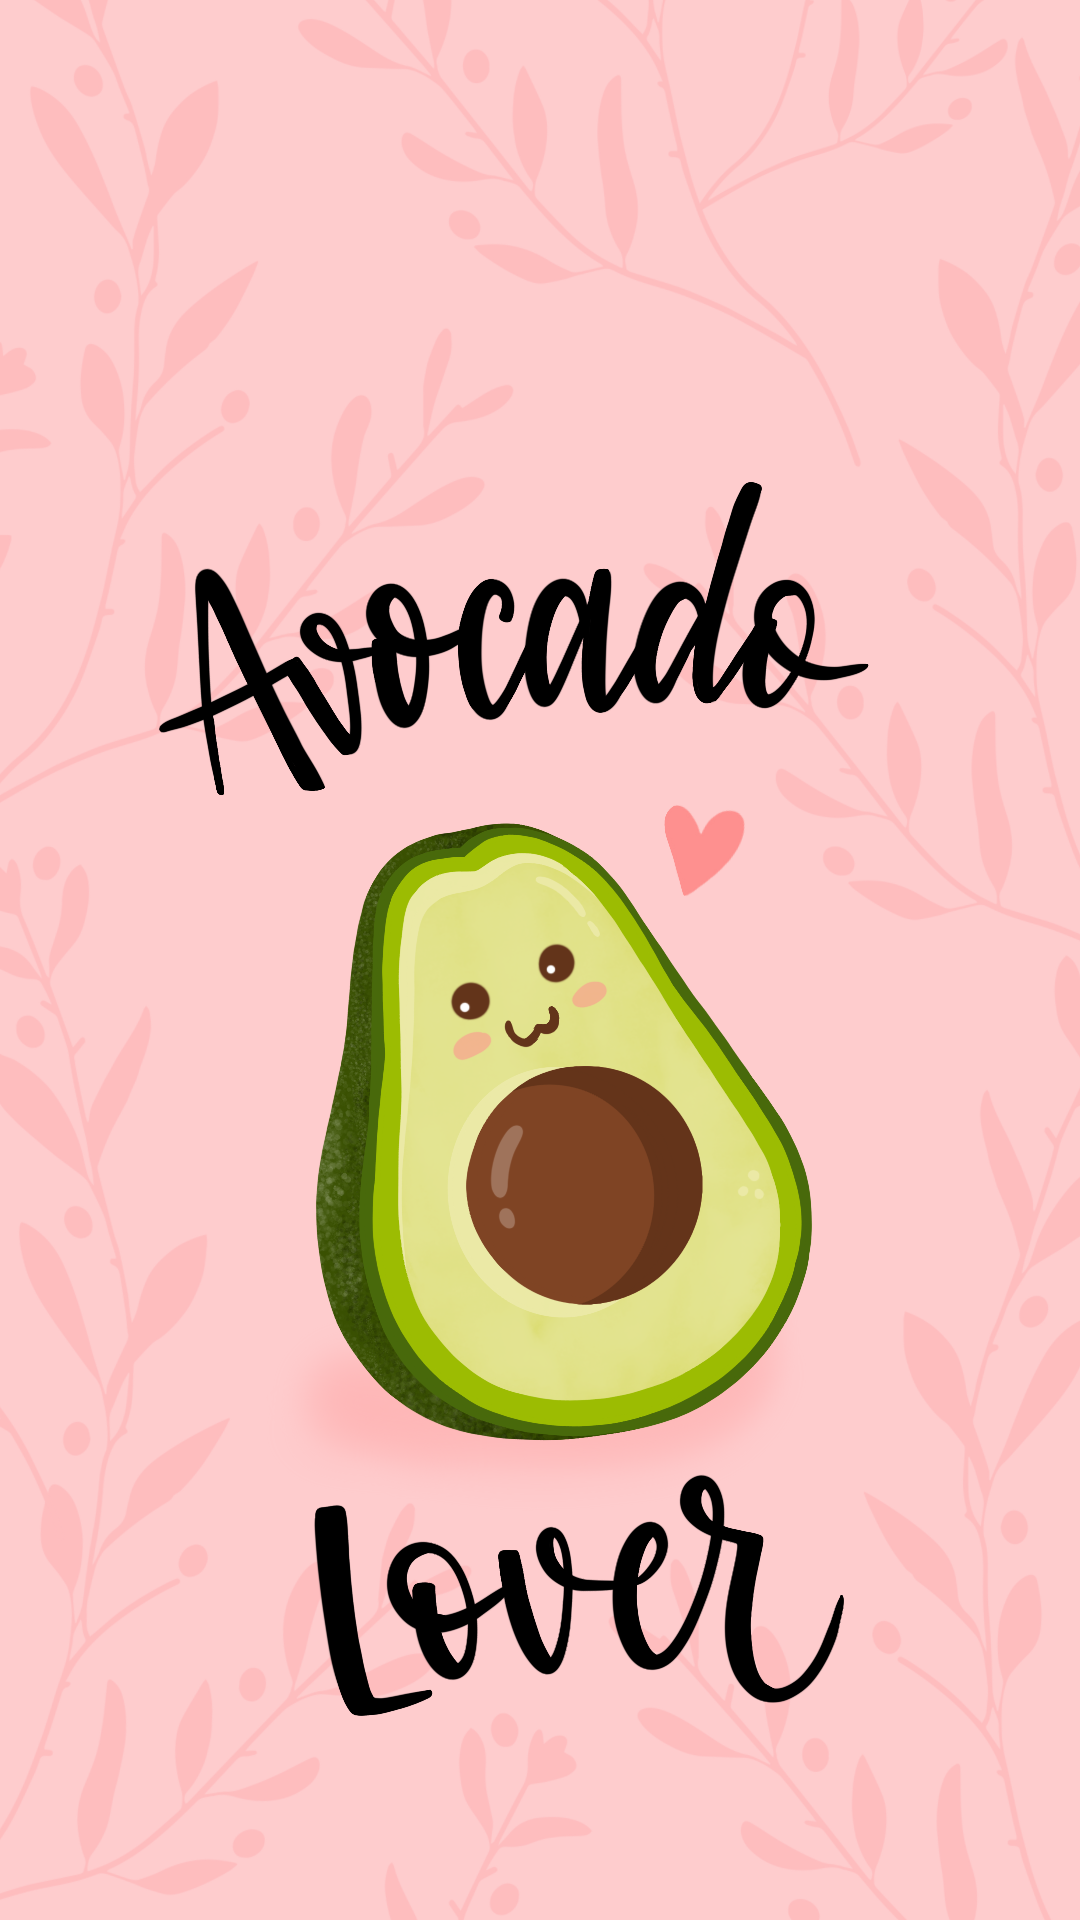 750 Avocado Pictures HD  Download Free Images on Unsplash